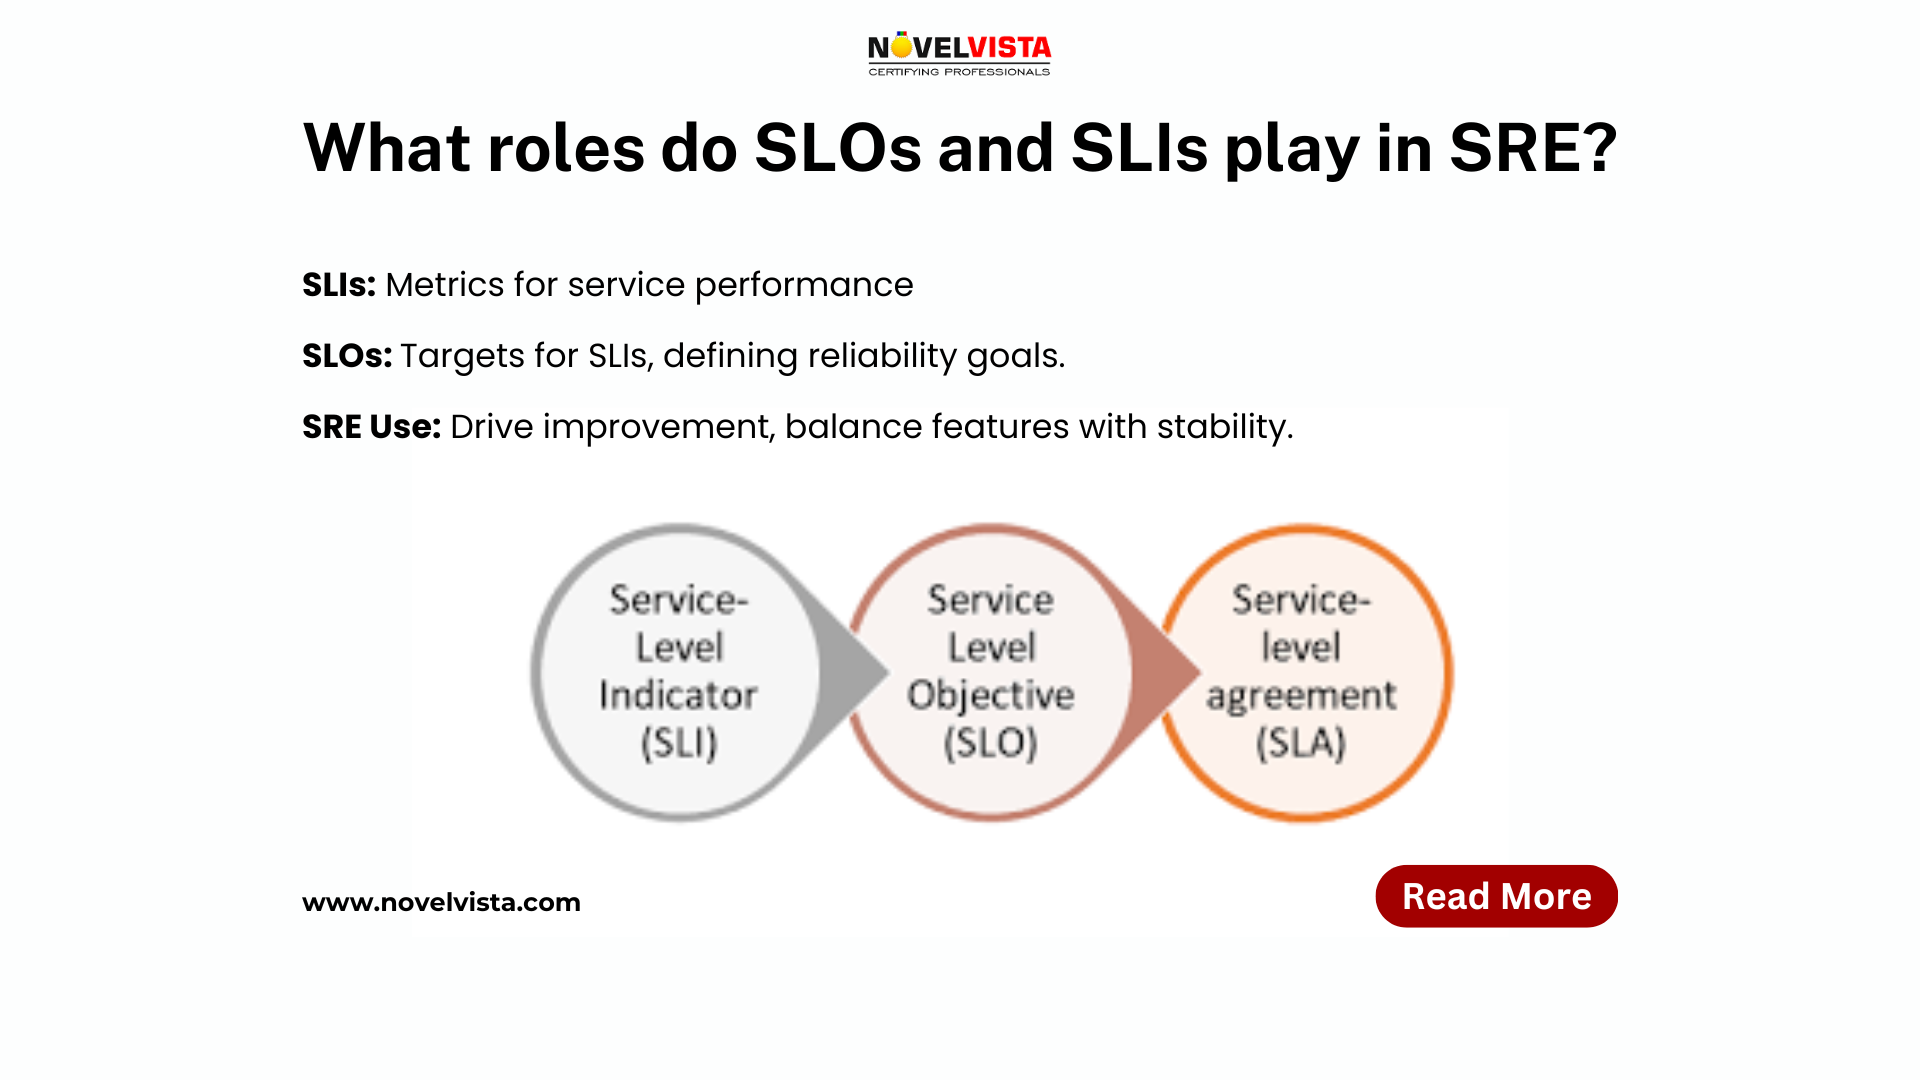 What roles do SLOs and SLIs play in SRE